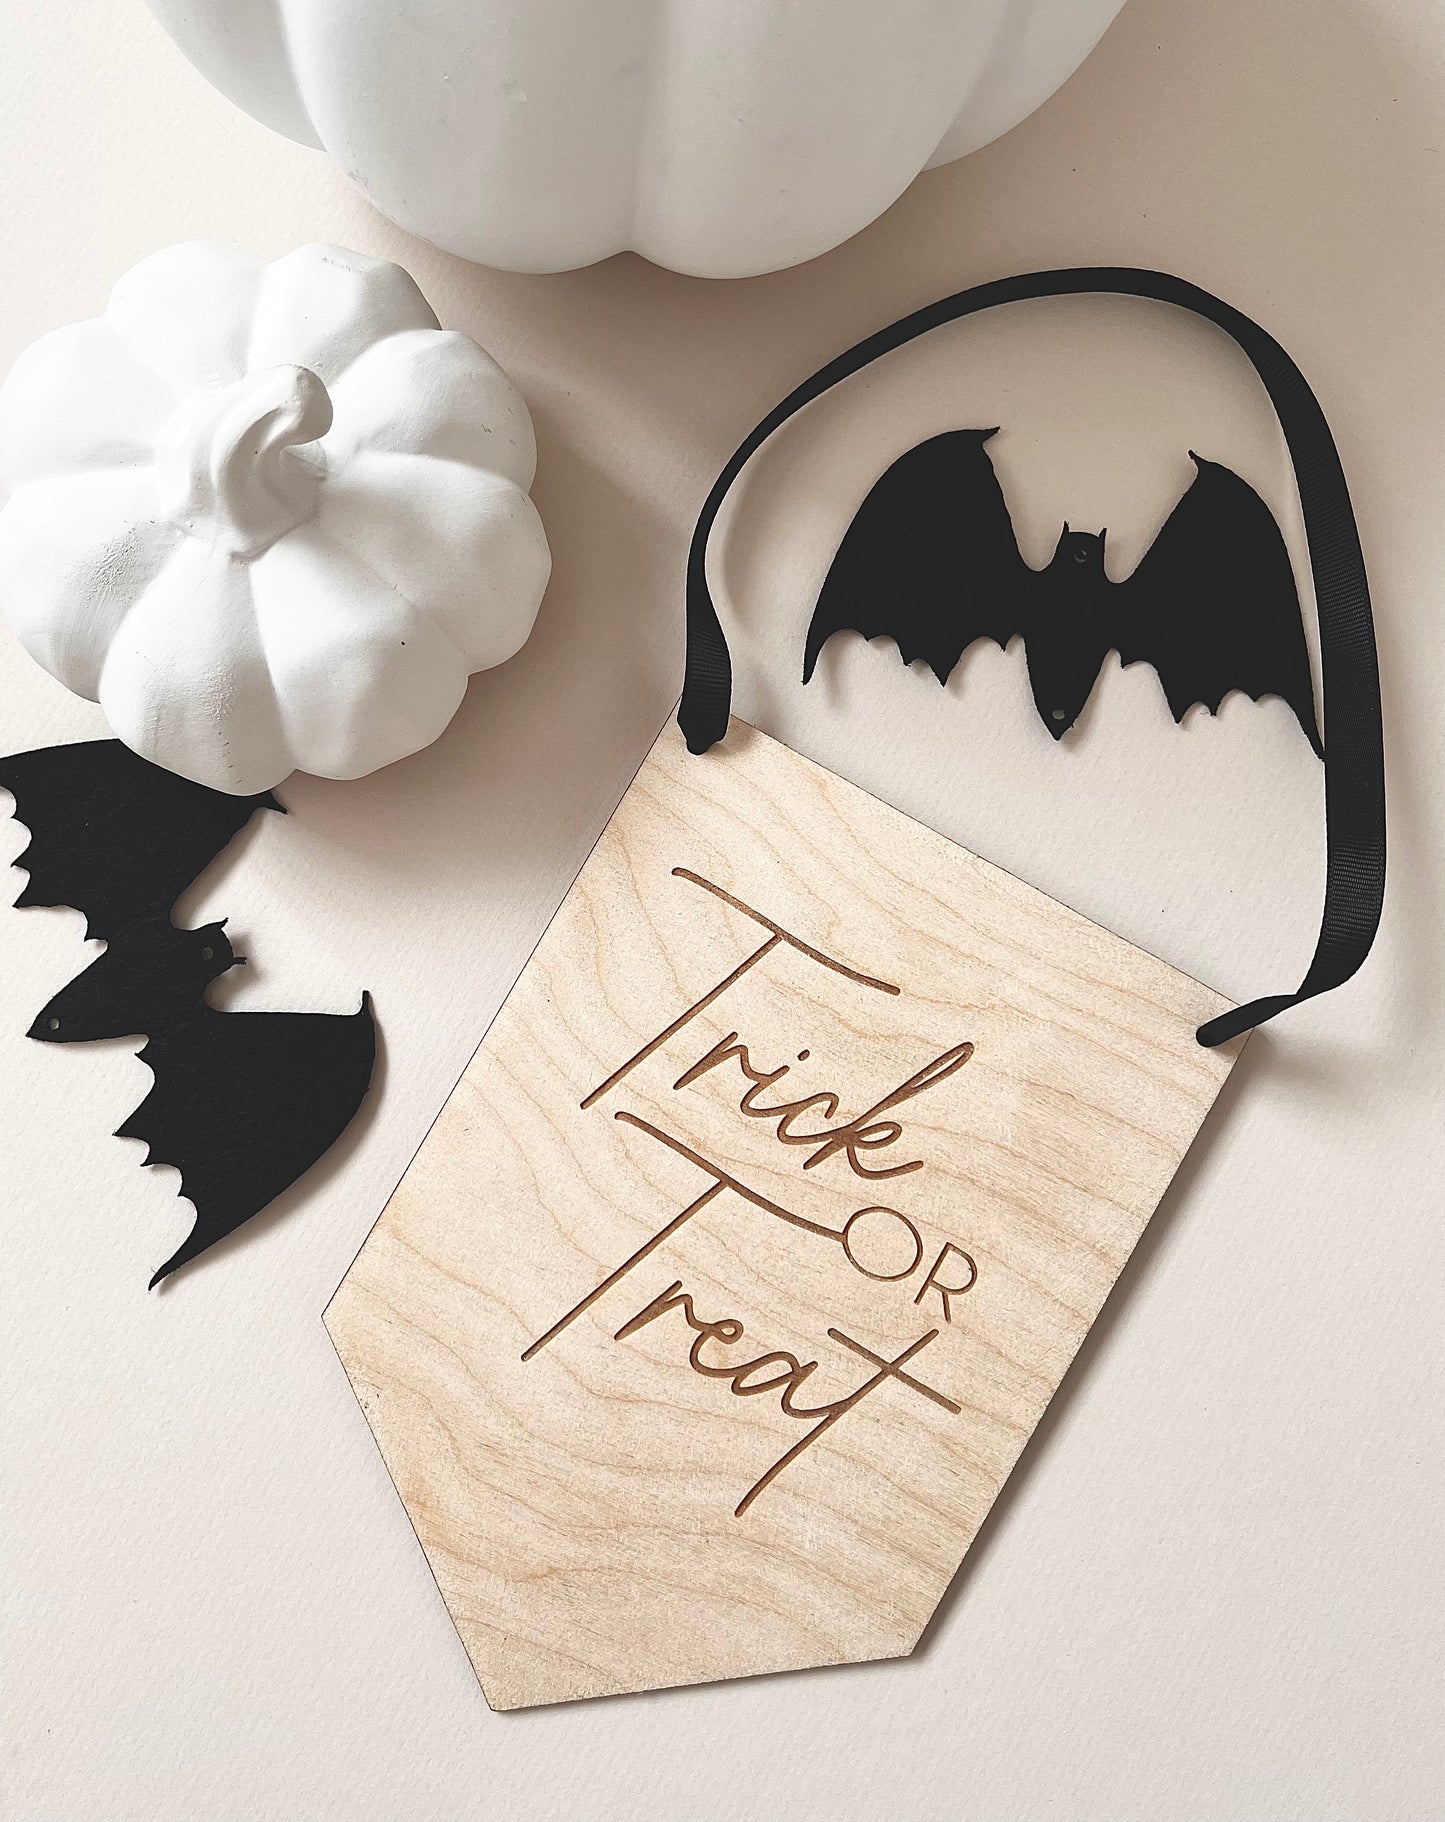 Trick or Treat hanging wall flag